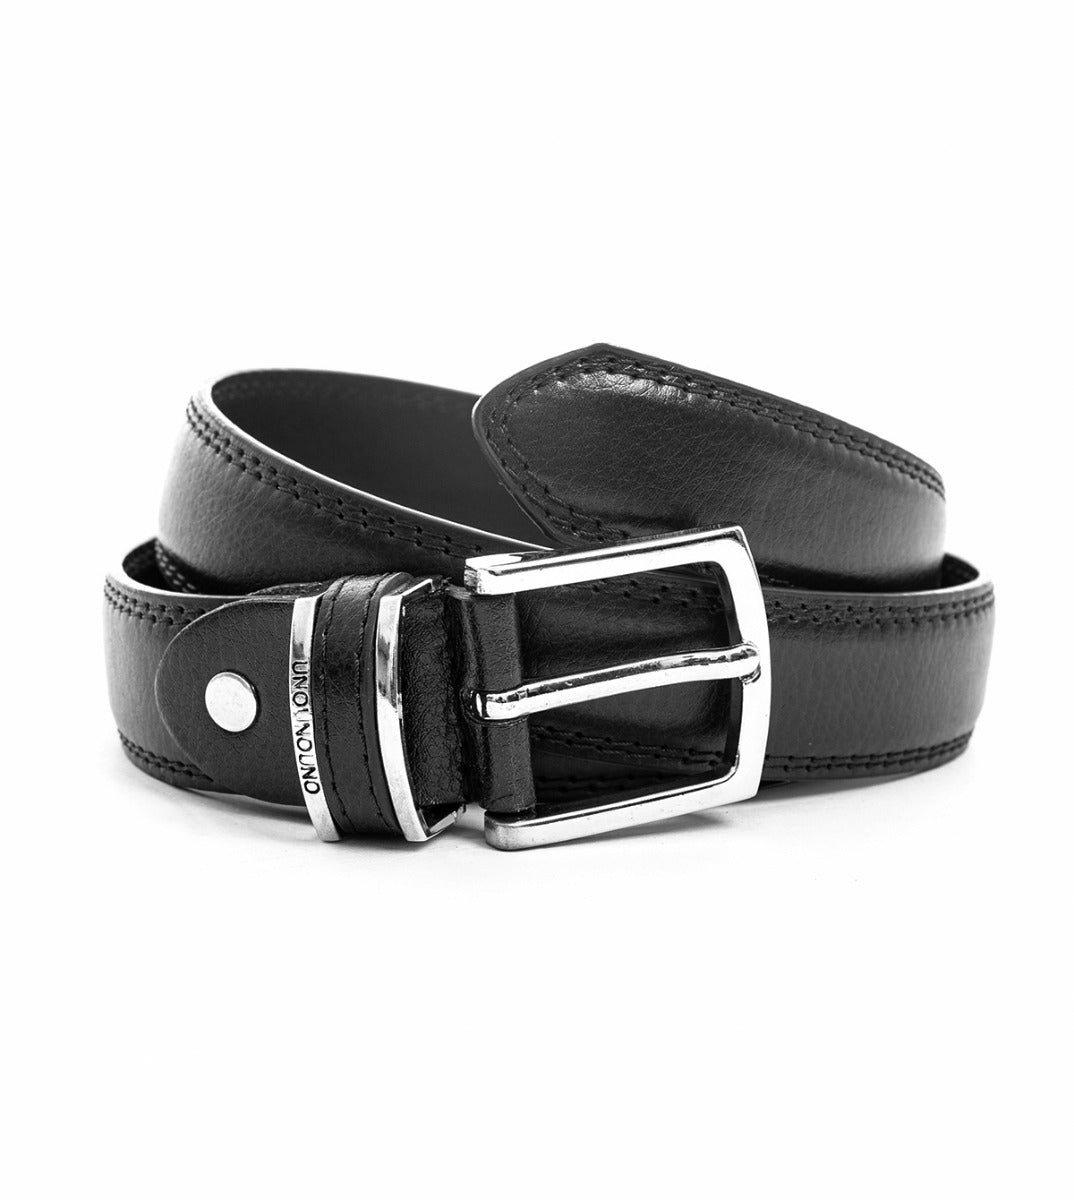 Narrow Men's Belt Adjustable Metal Buckle Black Textured Faux Leather GIOSAL-A2075A